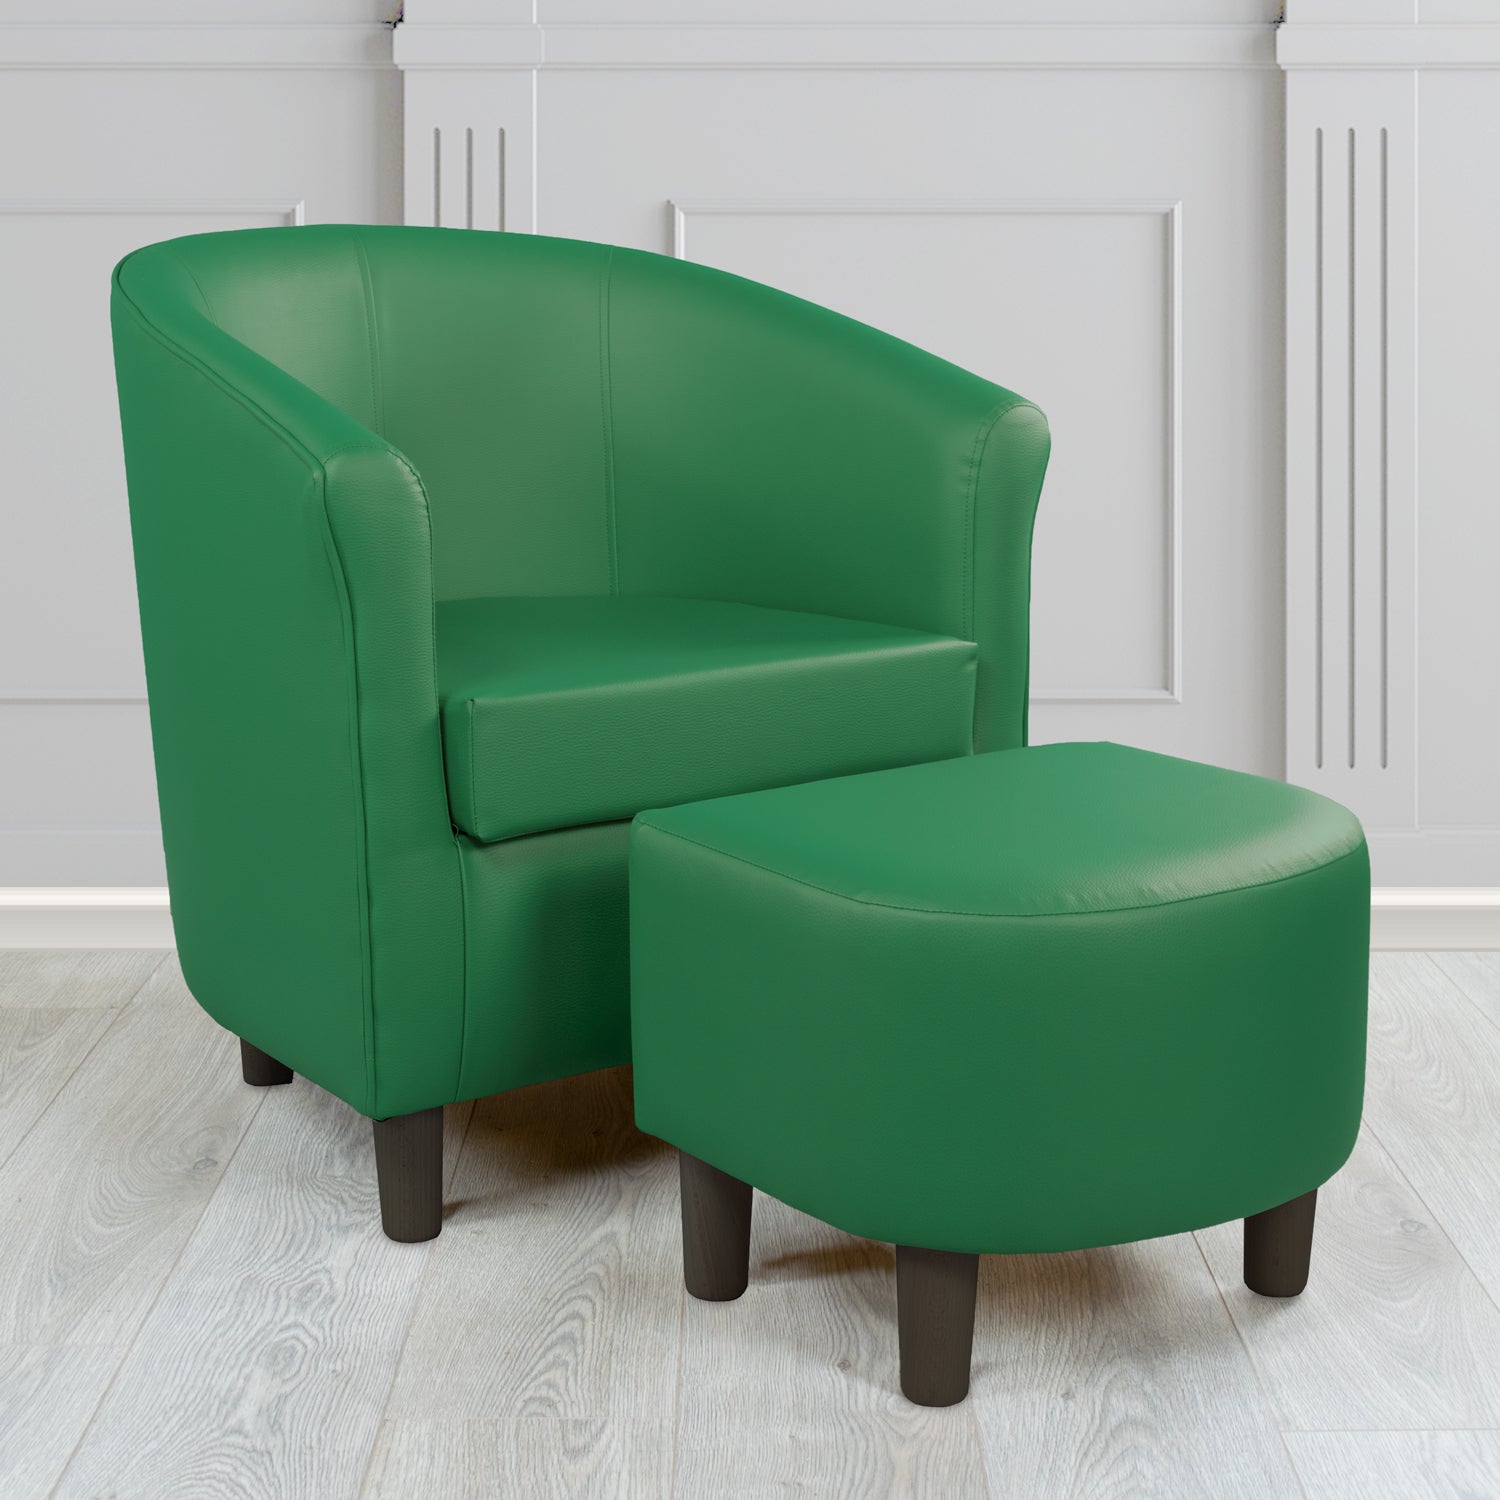 Tuscany Just Colour Laurel Faux Leather Tub Chair with Dee Footstool Set - The Tub Chair Shop